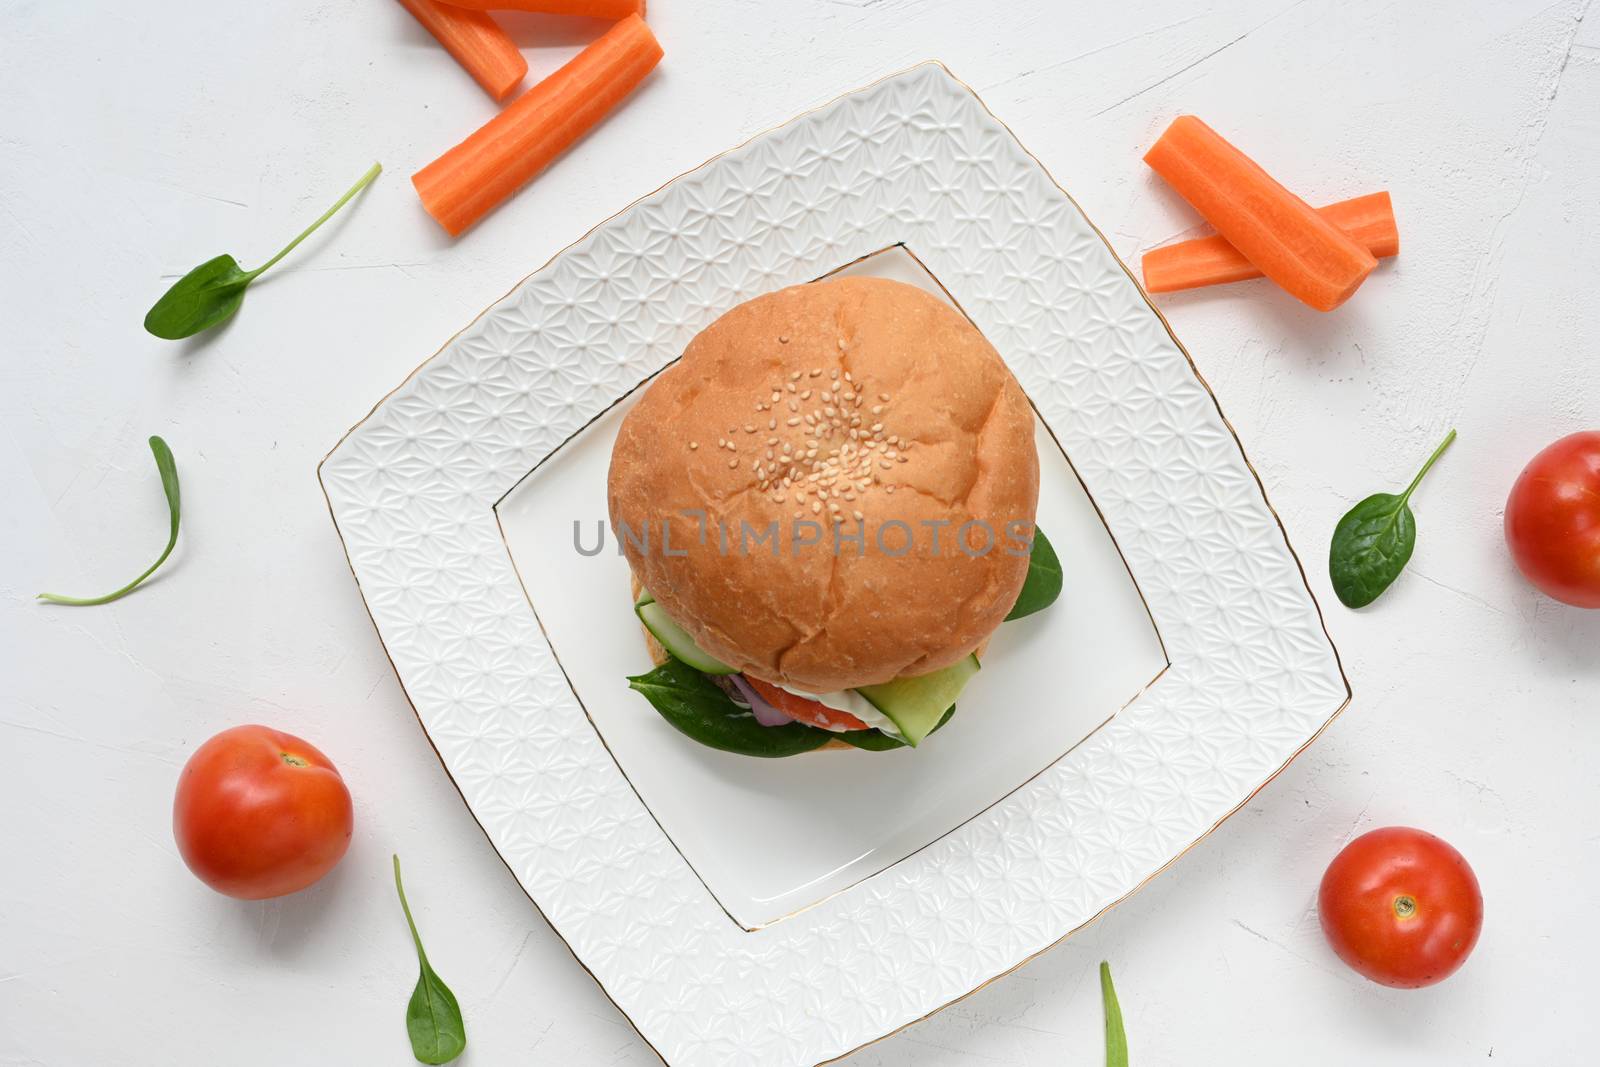 Milanese burger, with tomatoes, lettuce and french fries, in white background by sashokddt